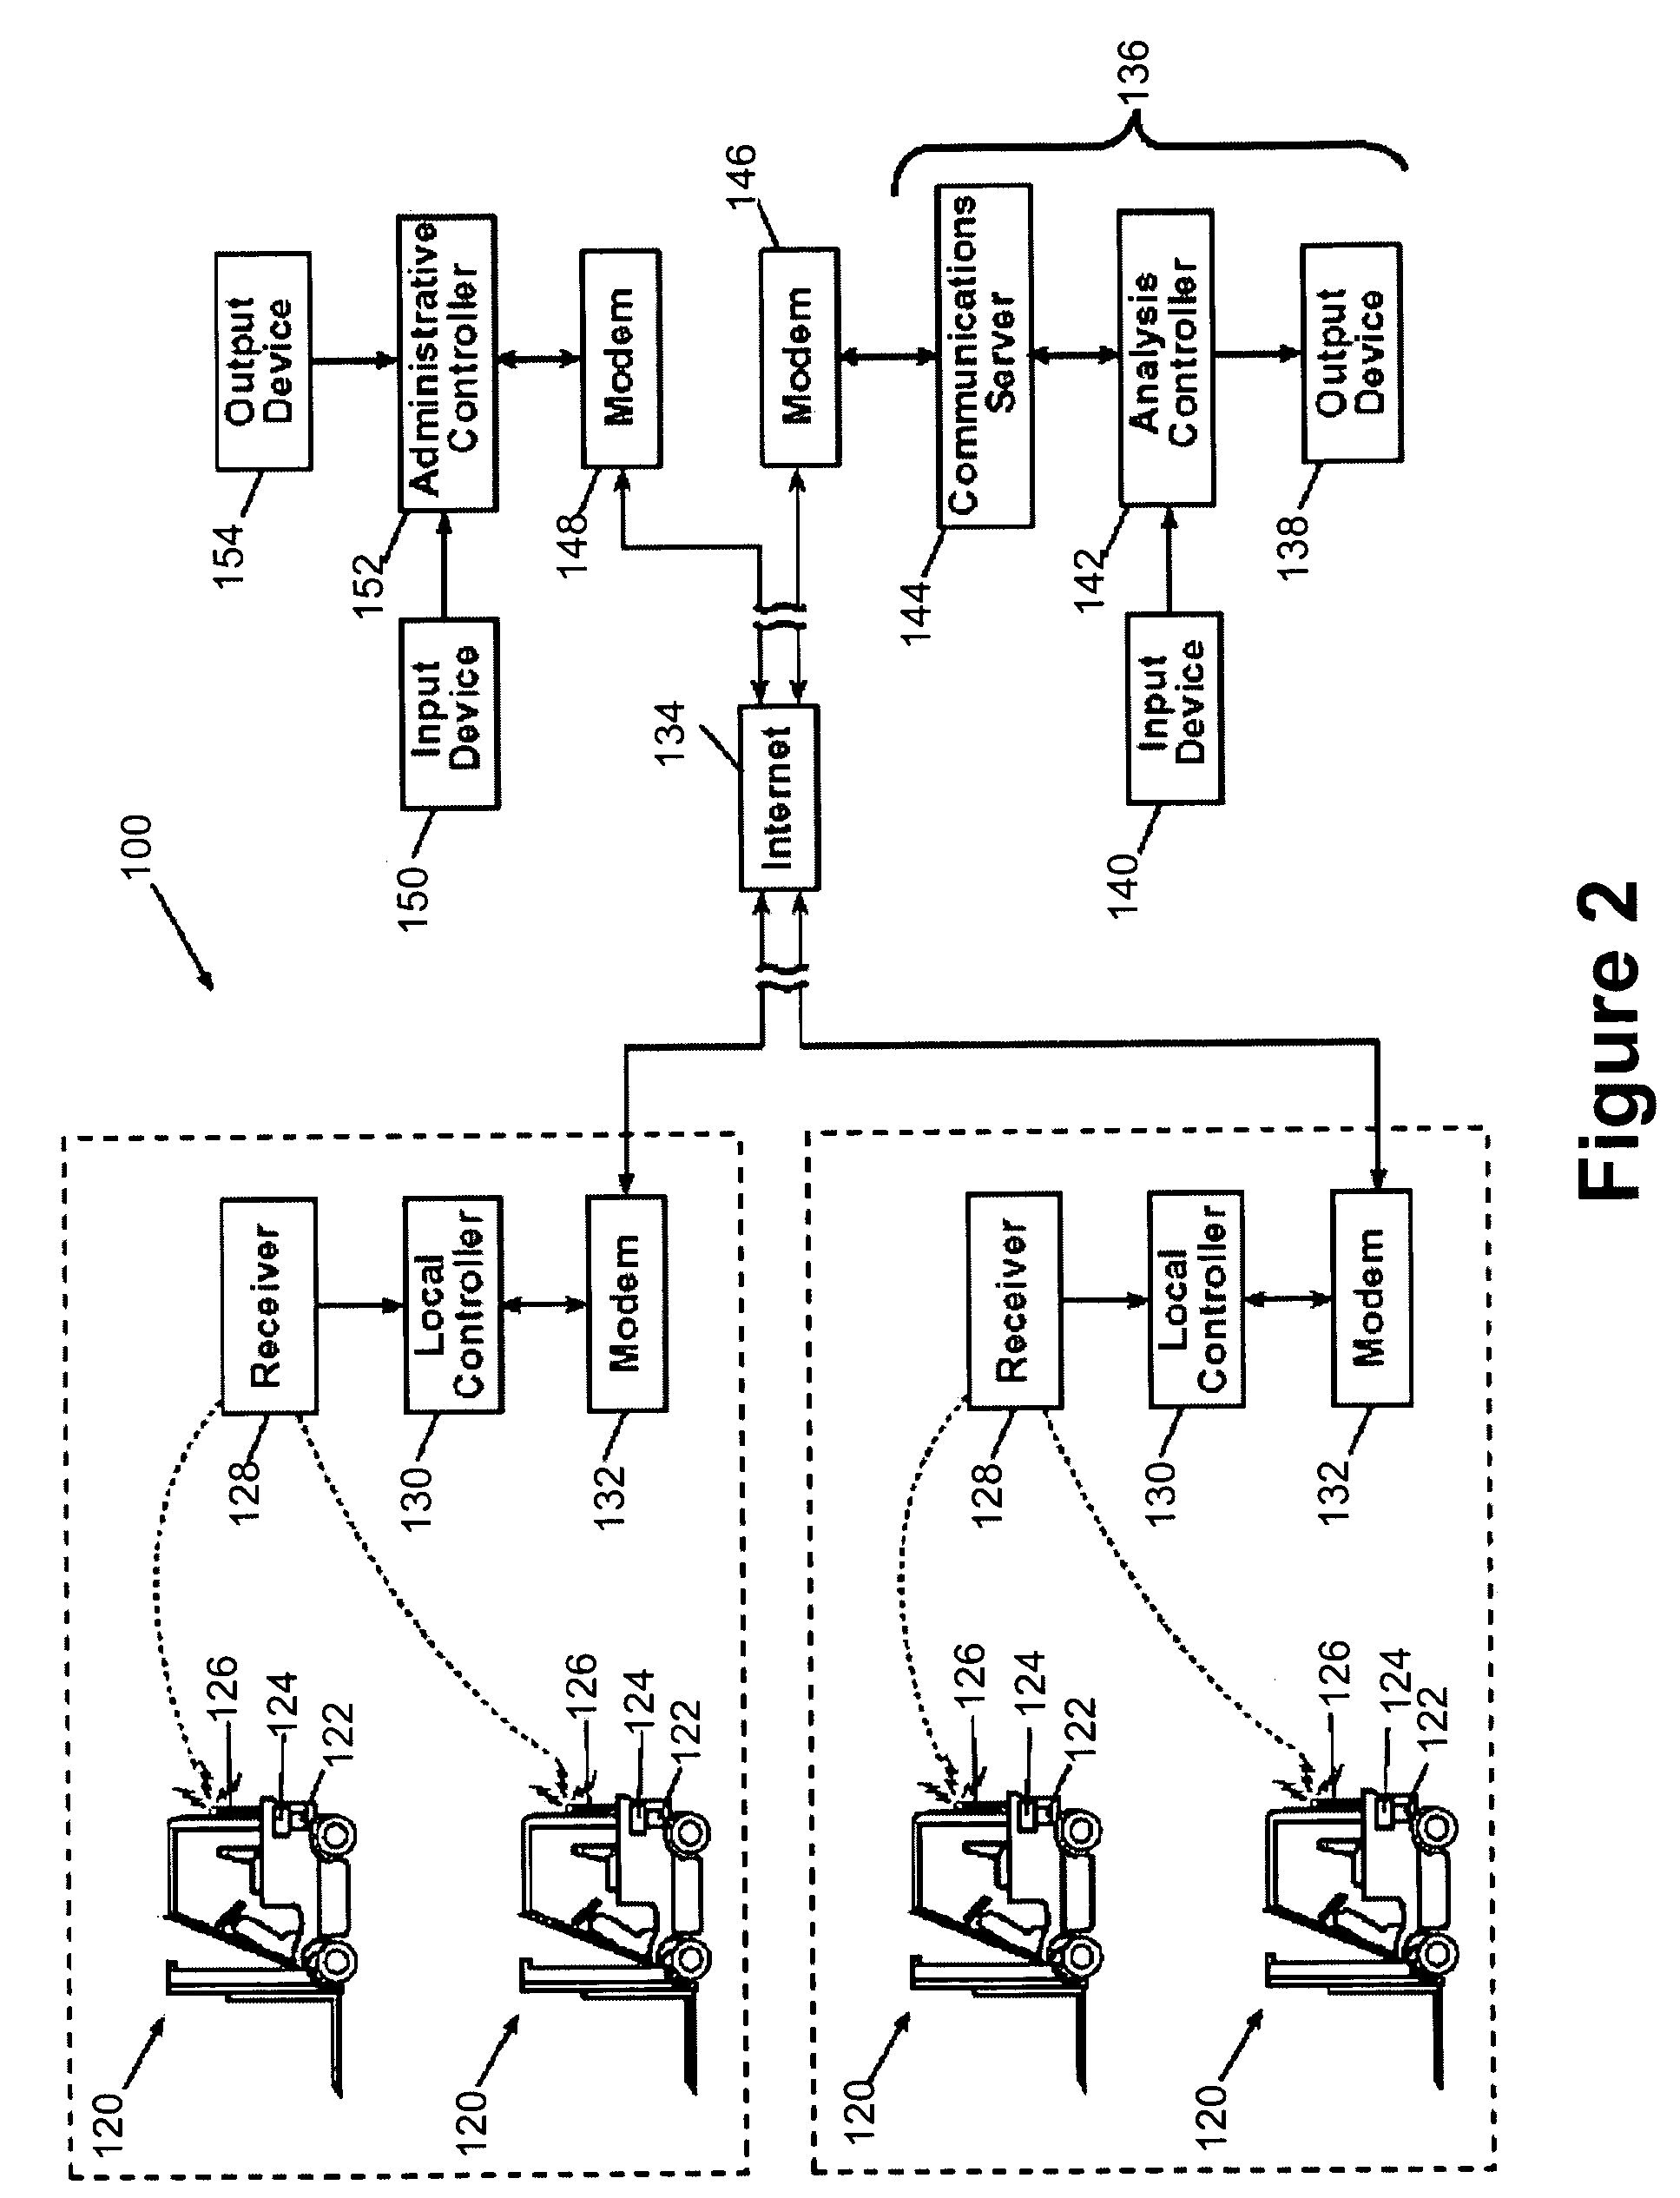 System or method for analyzing information organized in a configurable manner